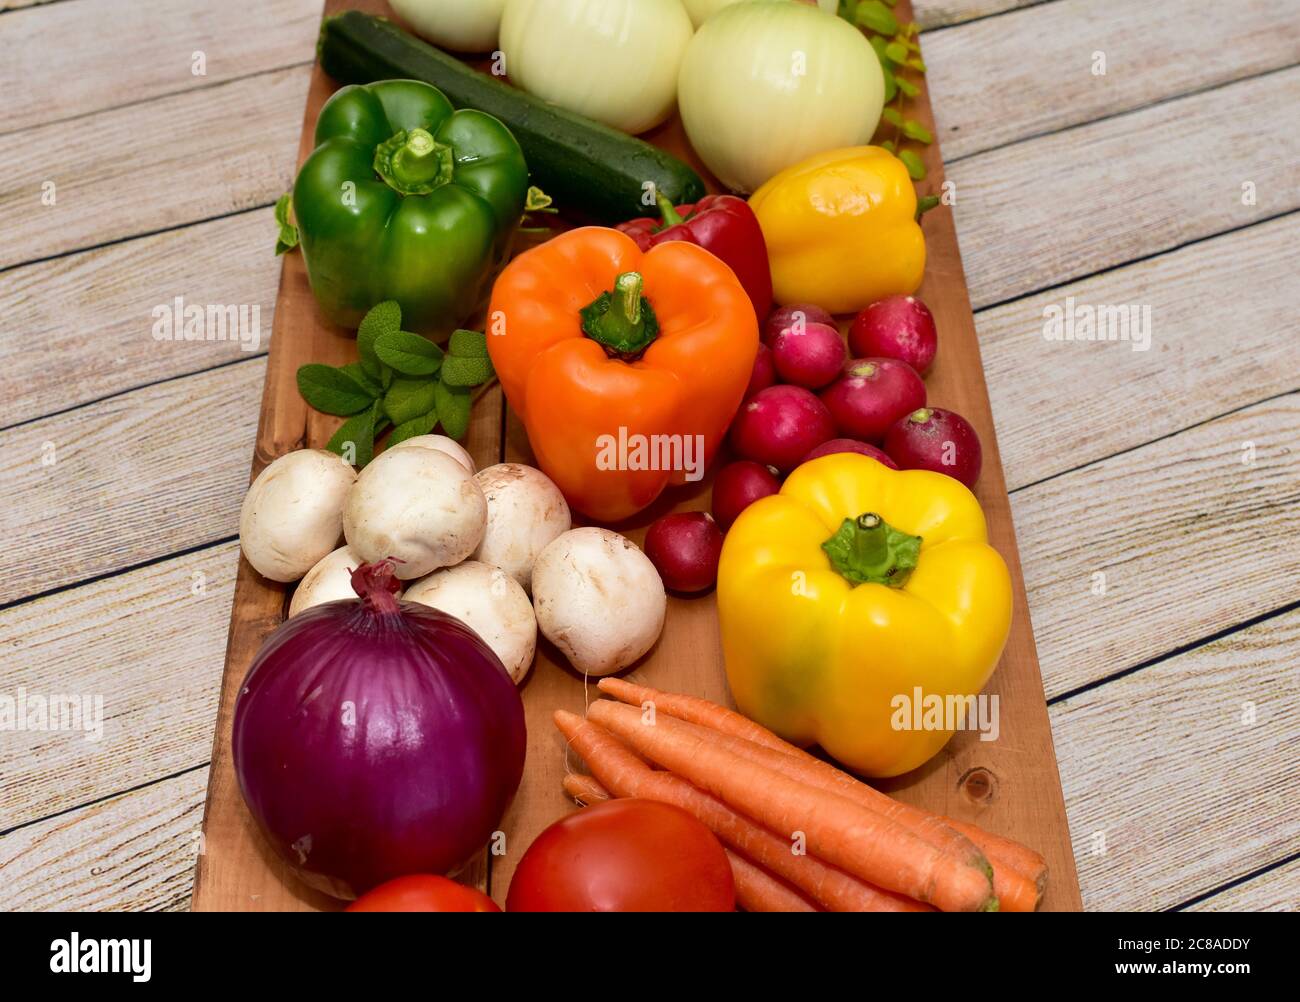 Fresh organic farmer's market vegetables washed and ready to cook into healthy lifestyle family meals Stock Photo